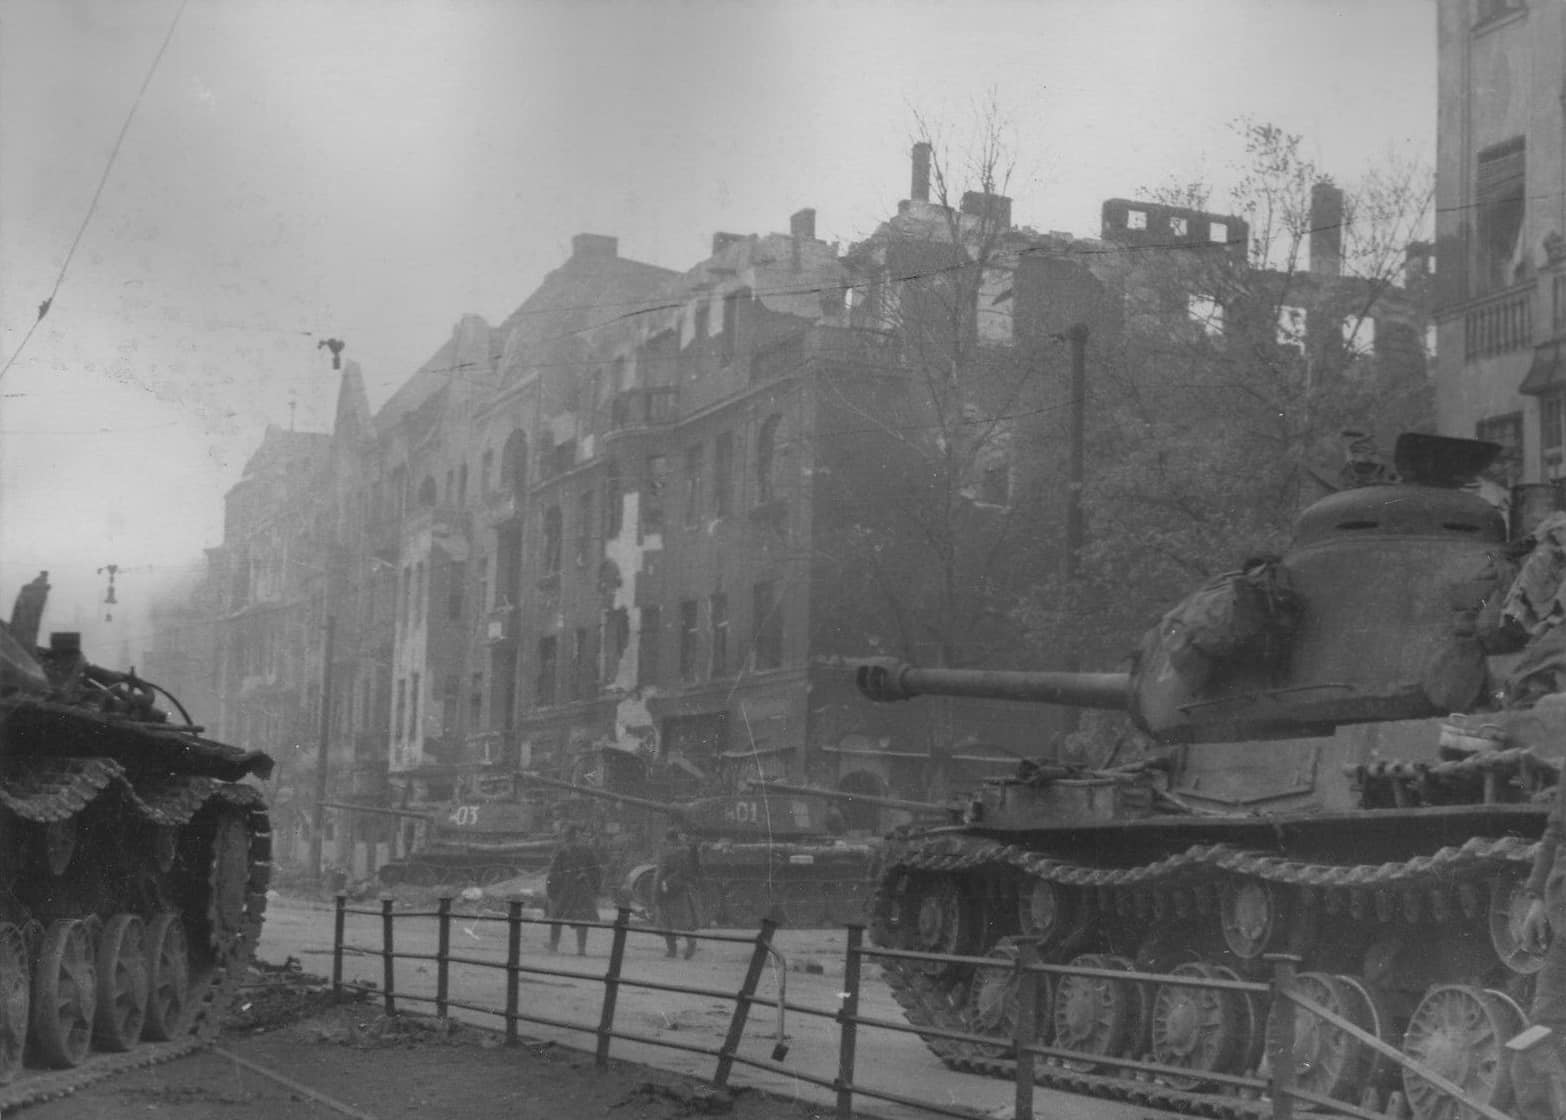 Column of the division of the Soviet heavy tanks IS-2 on the streets of Berlin